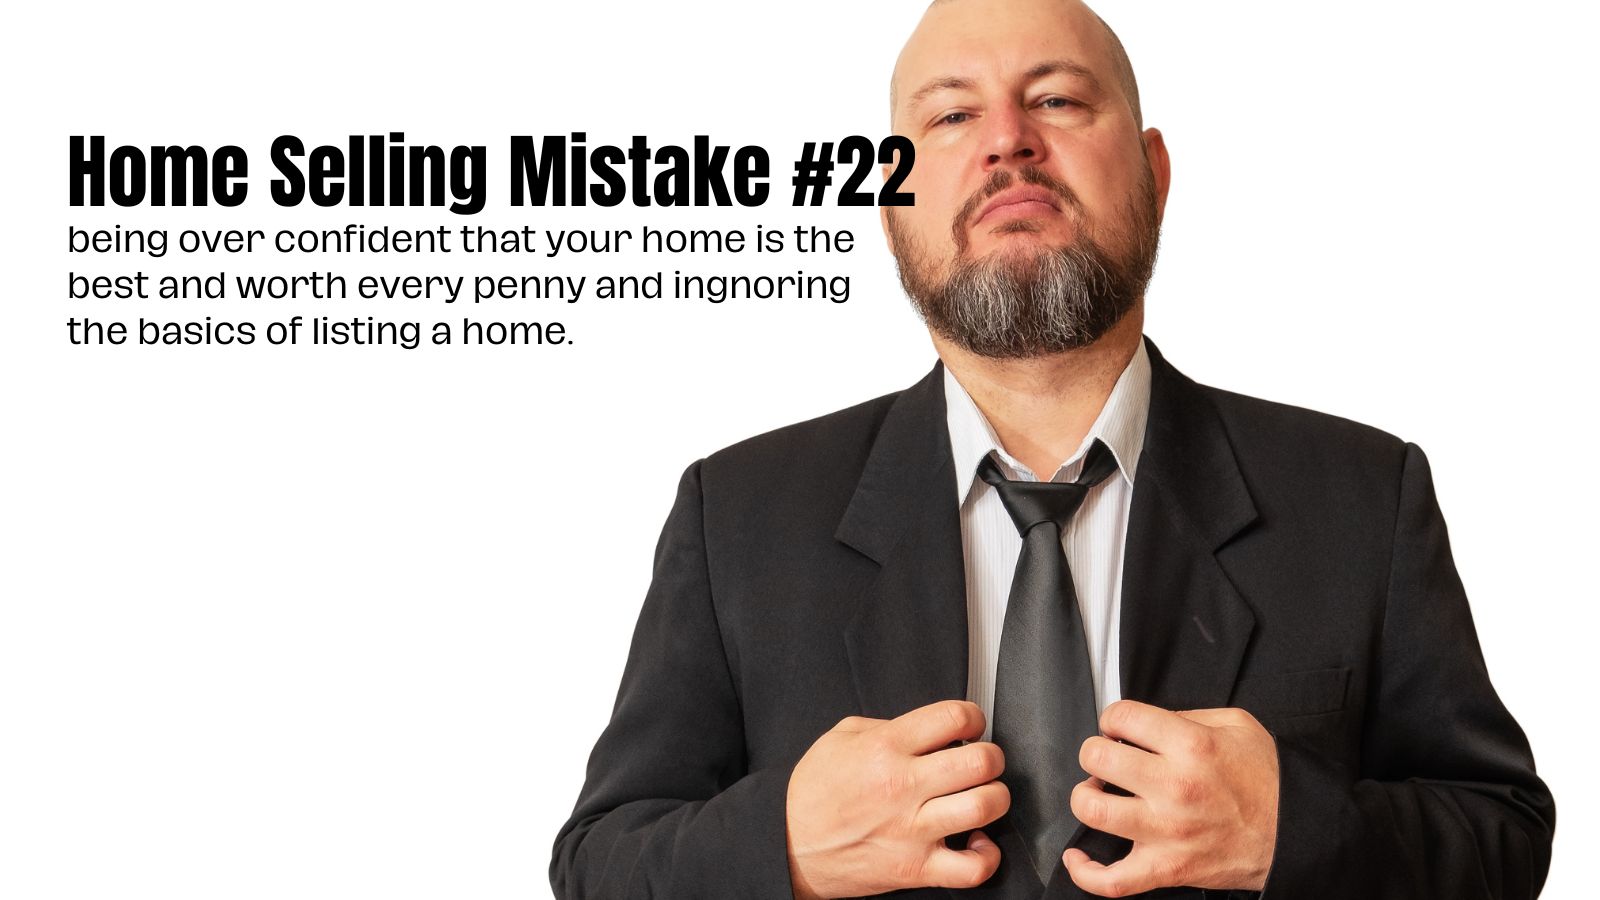 Home Seller Mistake #22 Over confidence